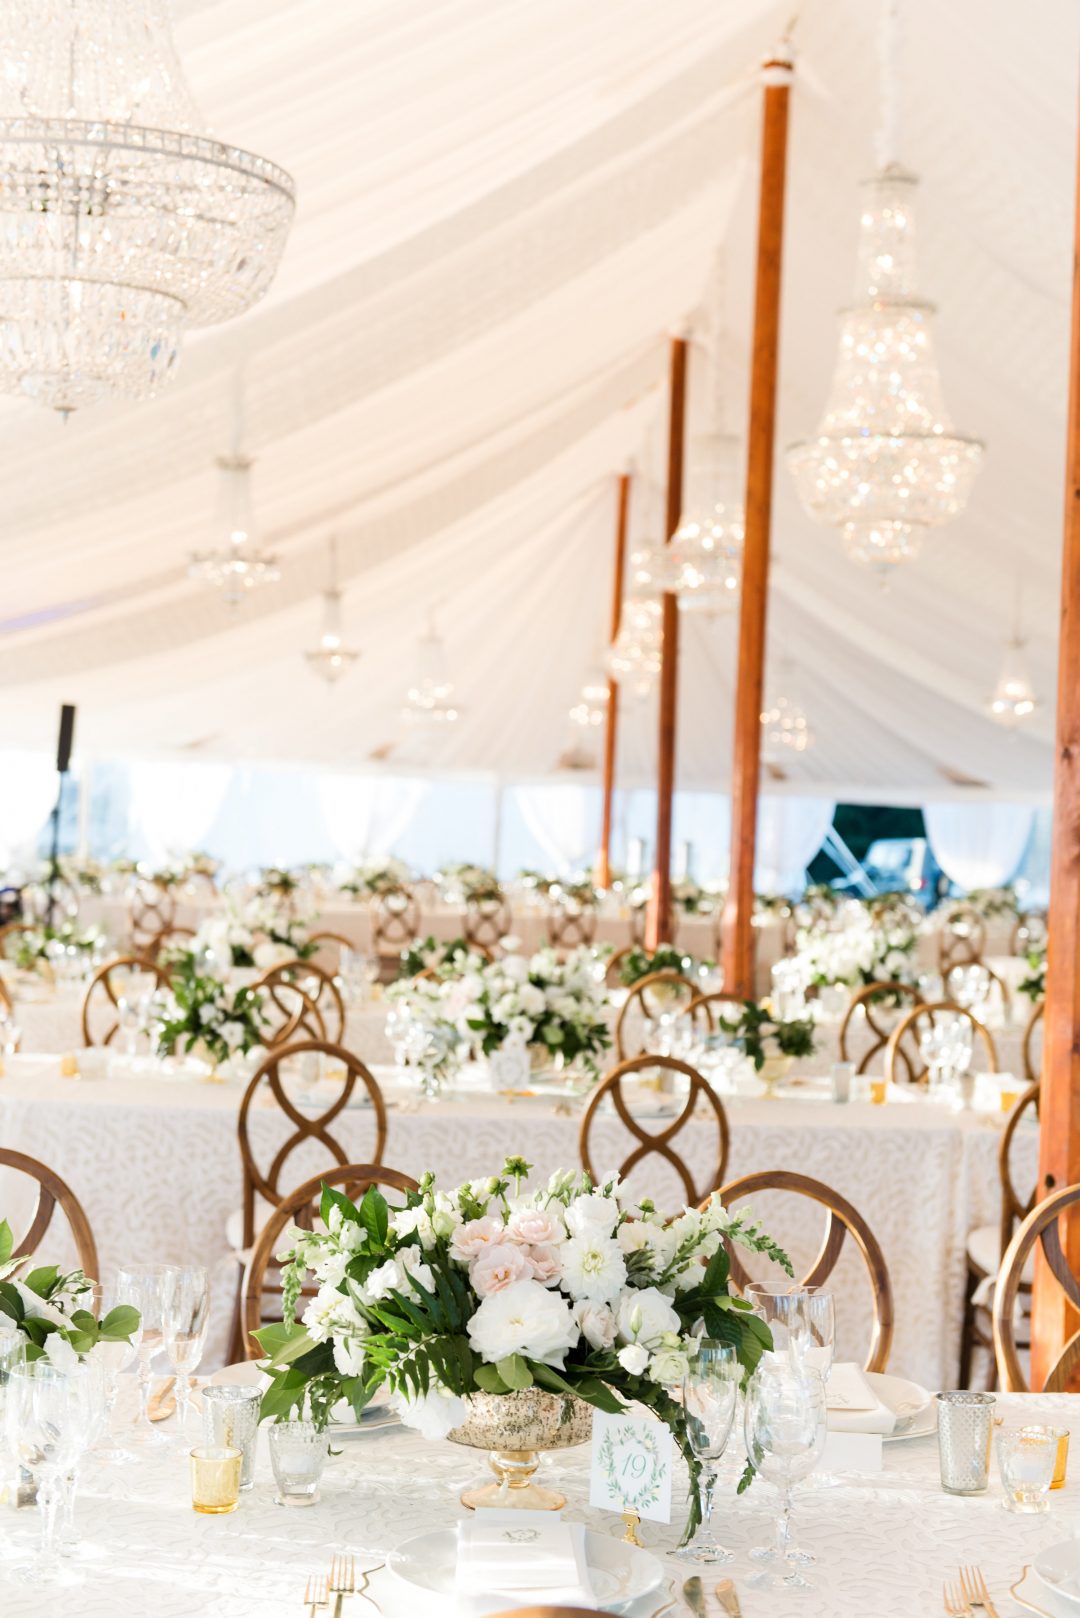 3 Ways To Spruce Up Your Wedding Tent Decor Using Draping